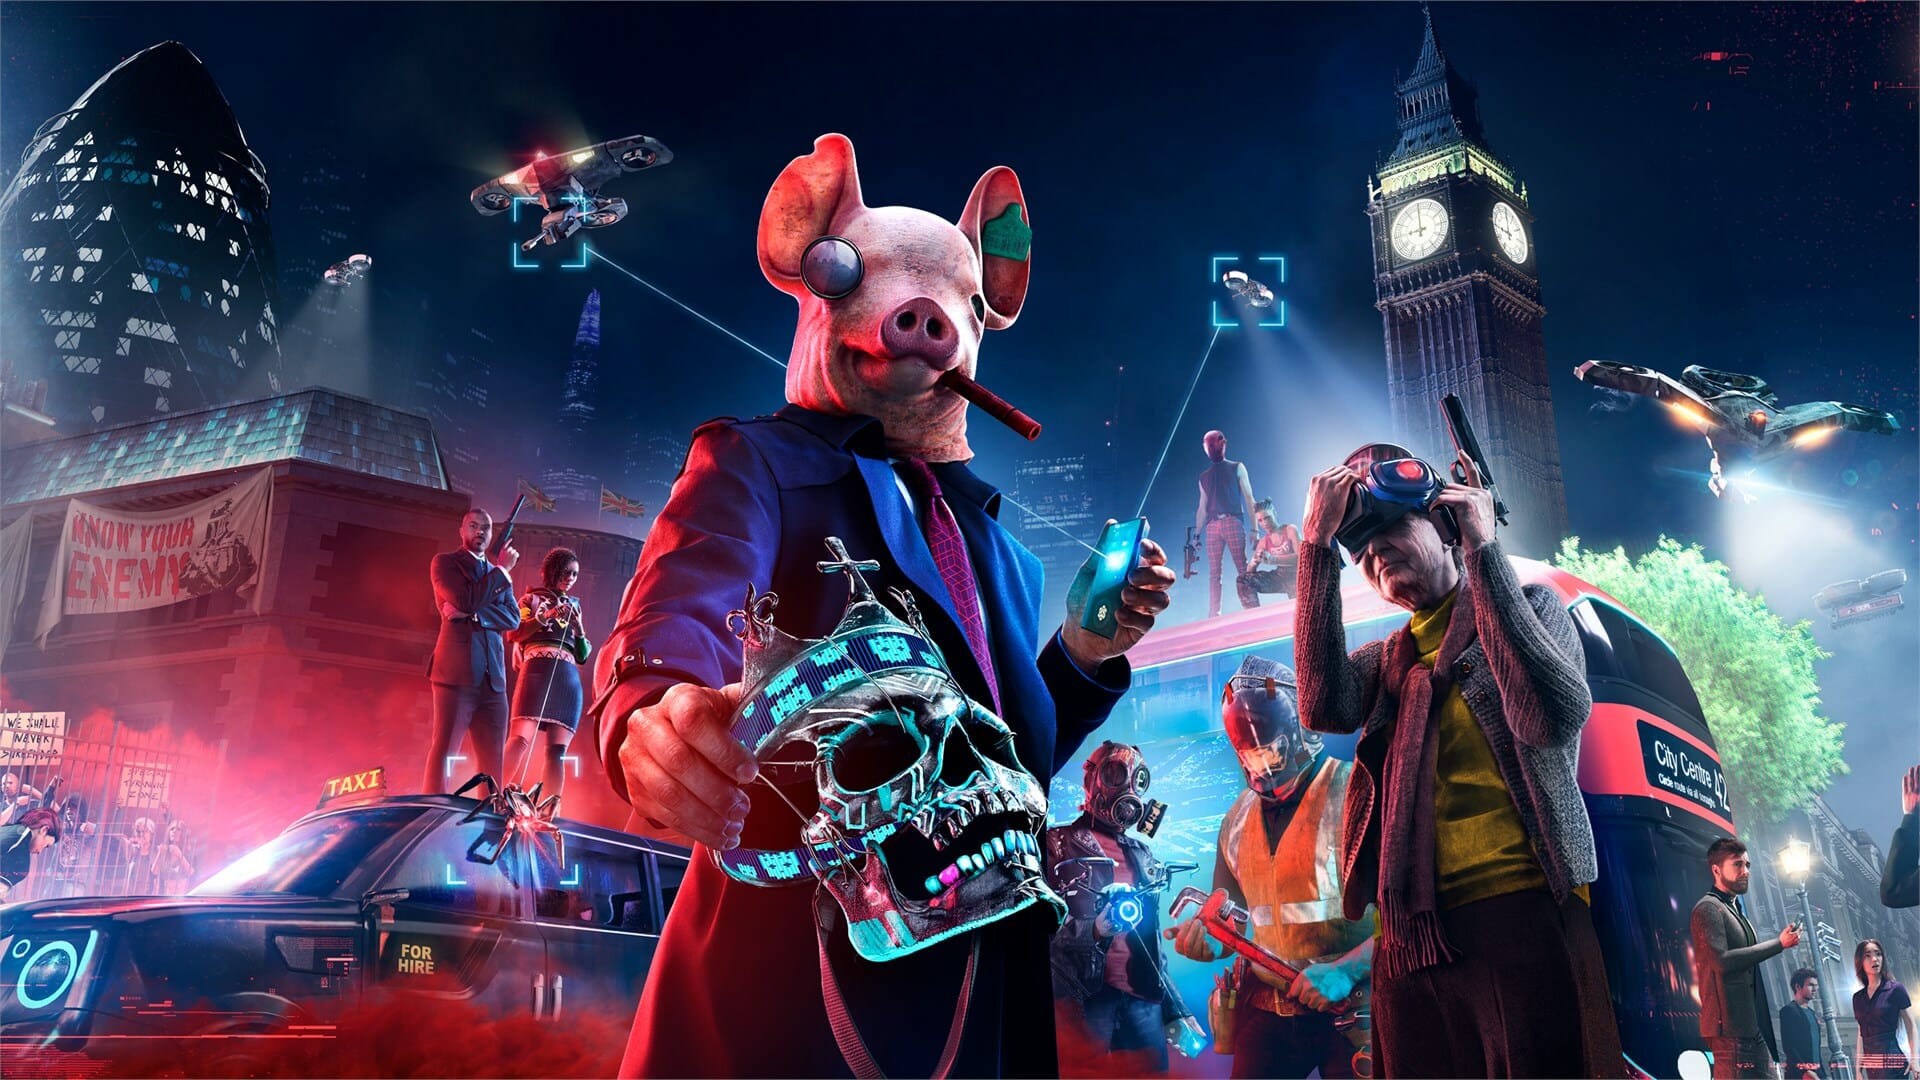 Watch Dogs Legion - How to Transfer Save Game from Ubisoft to Steam Version